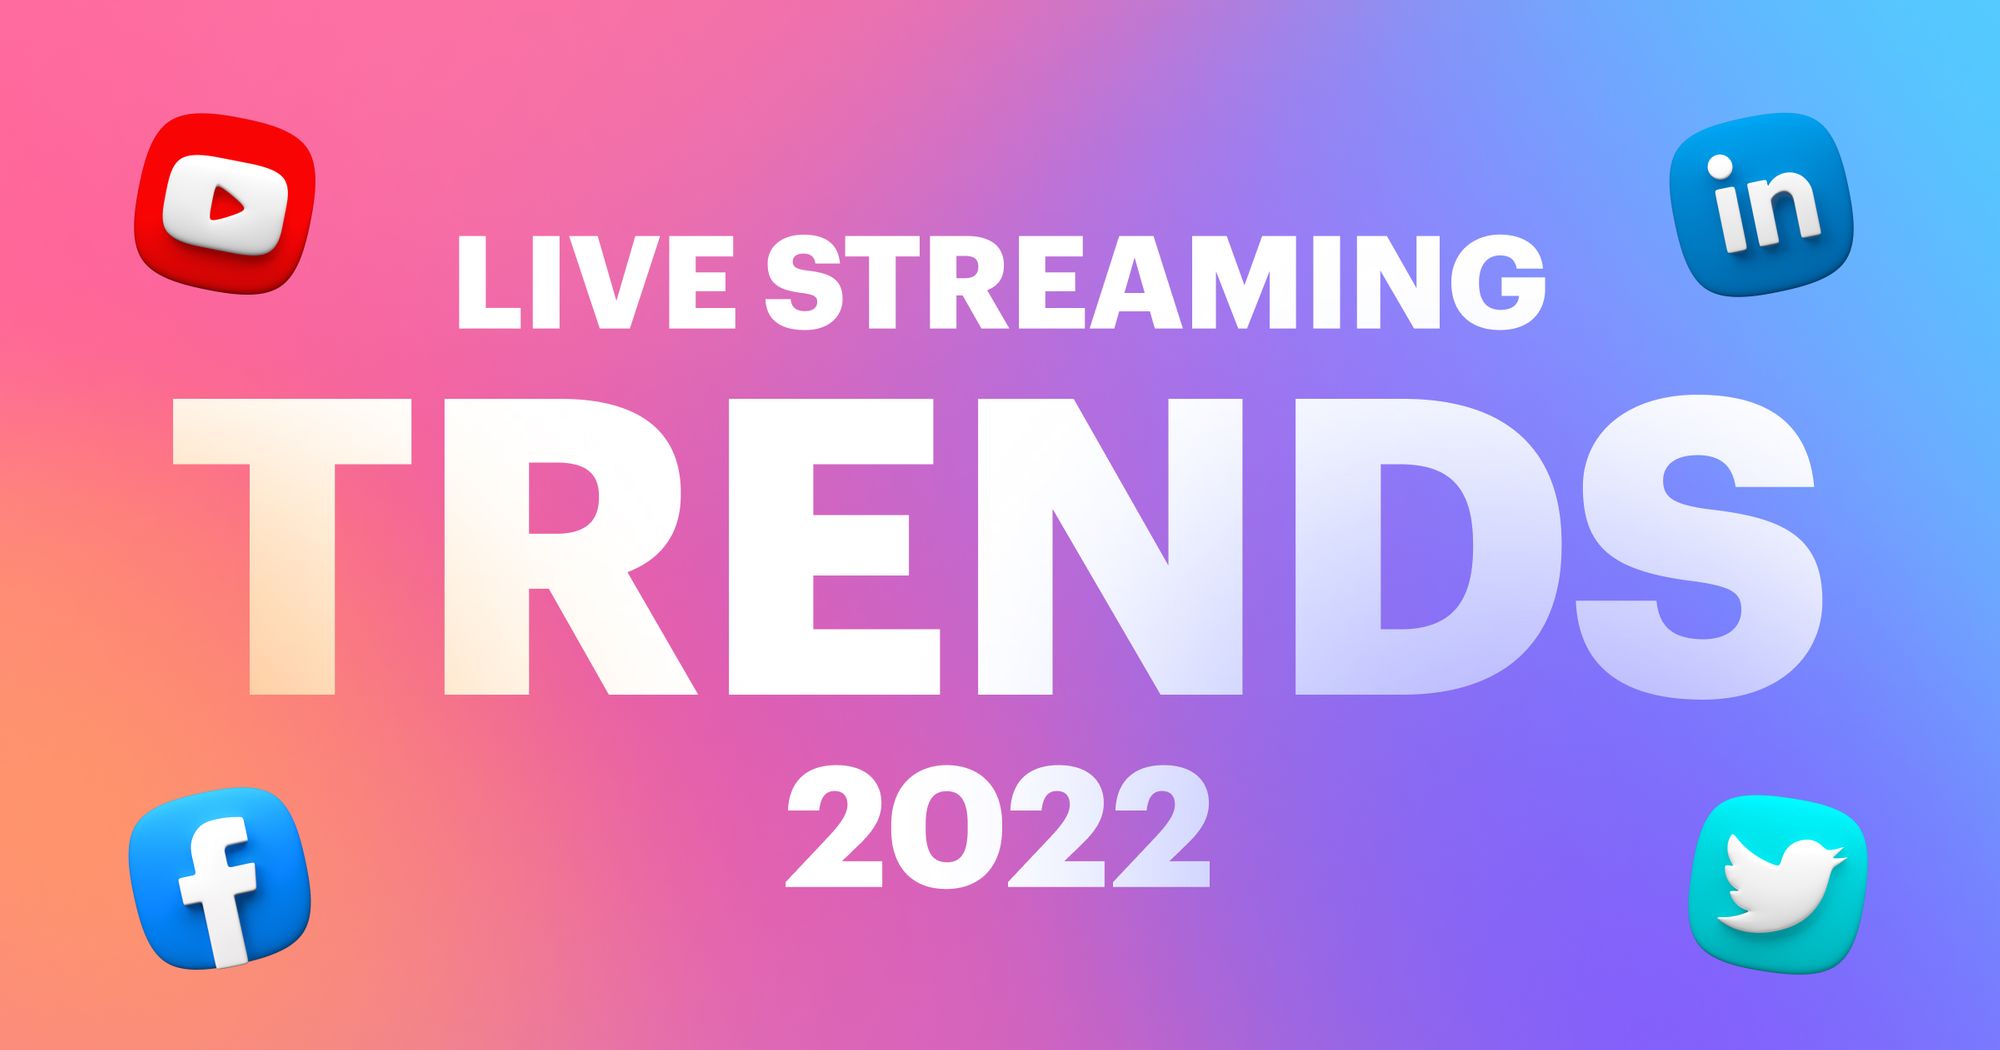 2022 live streaming trends to watch for